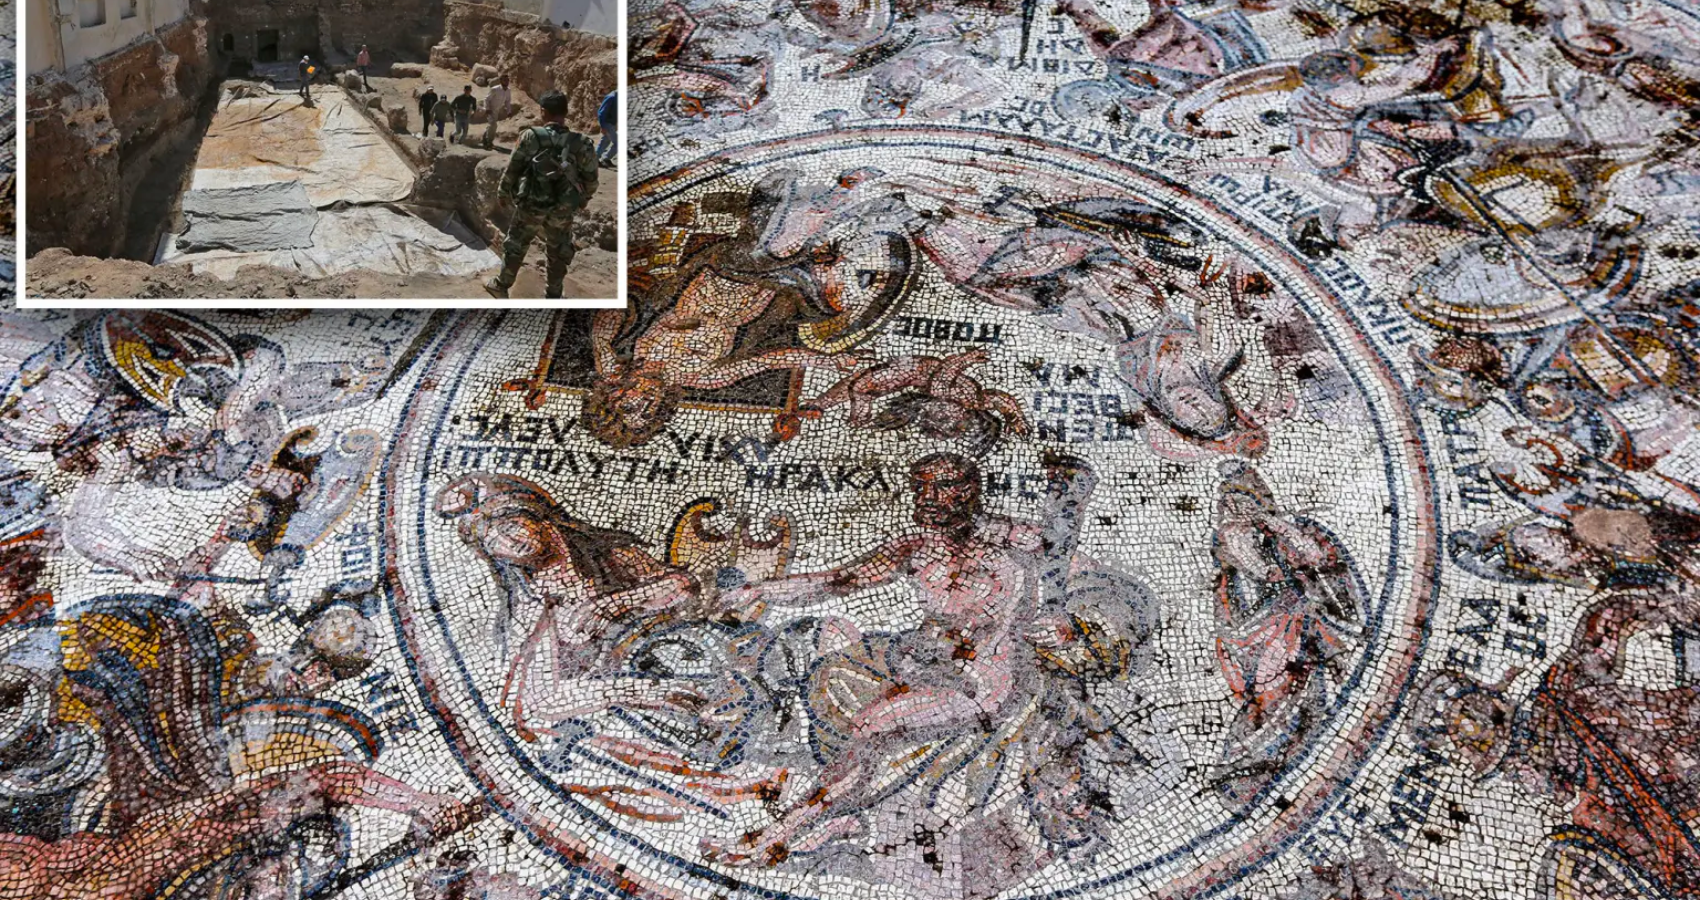 Incredibly ‘rare’ Roman mosaic depicting the Trojan War is found in Syria